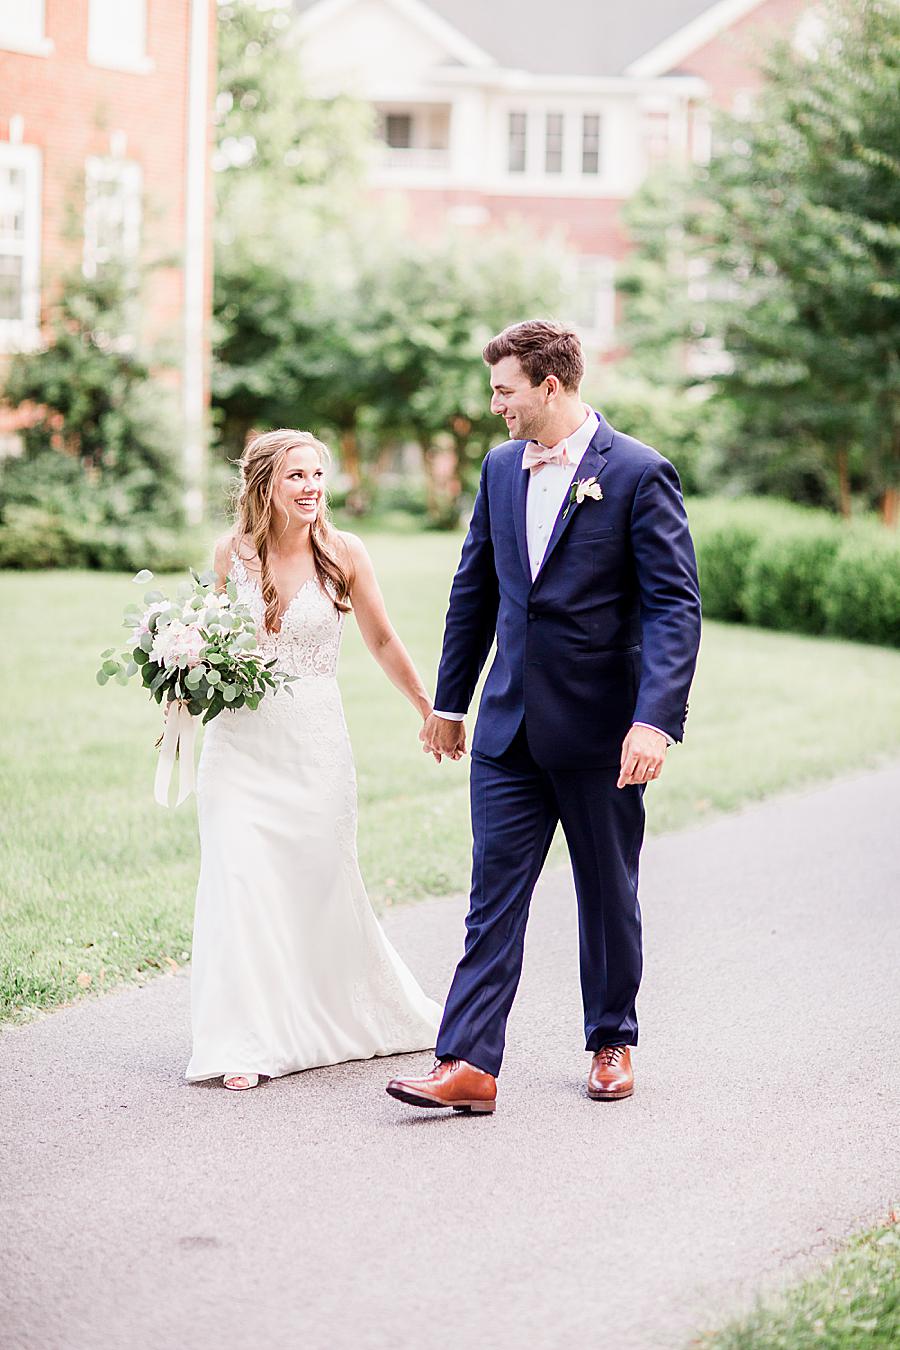 Walking and holding hands at this The Olmsted Wedding by Knoxville Wedding Photographer, Amanda May Photos.